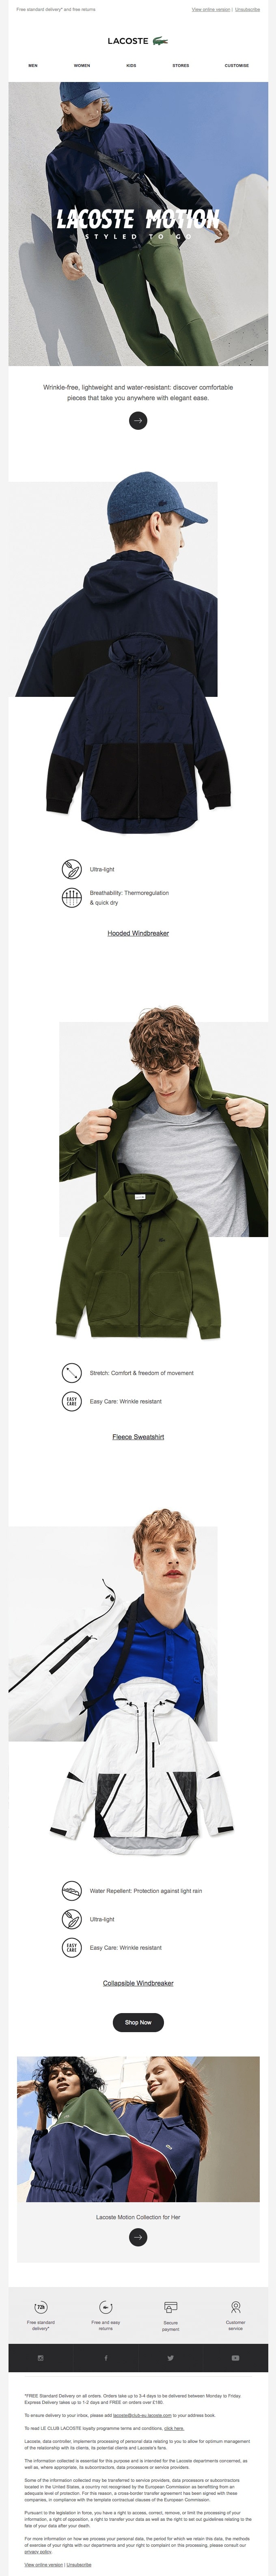 Lacoste uses fonts in their email design